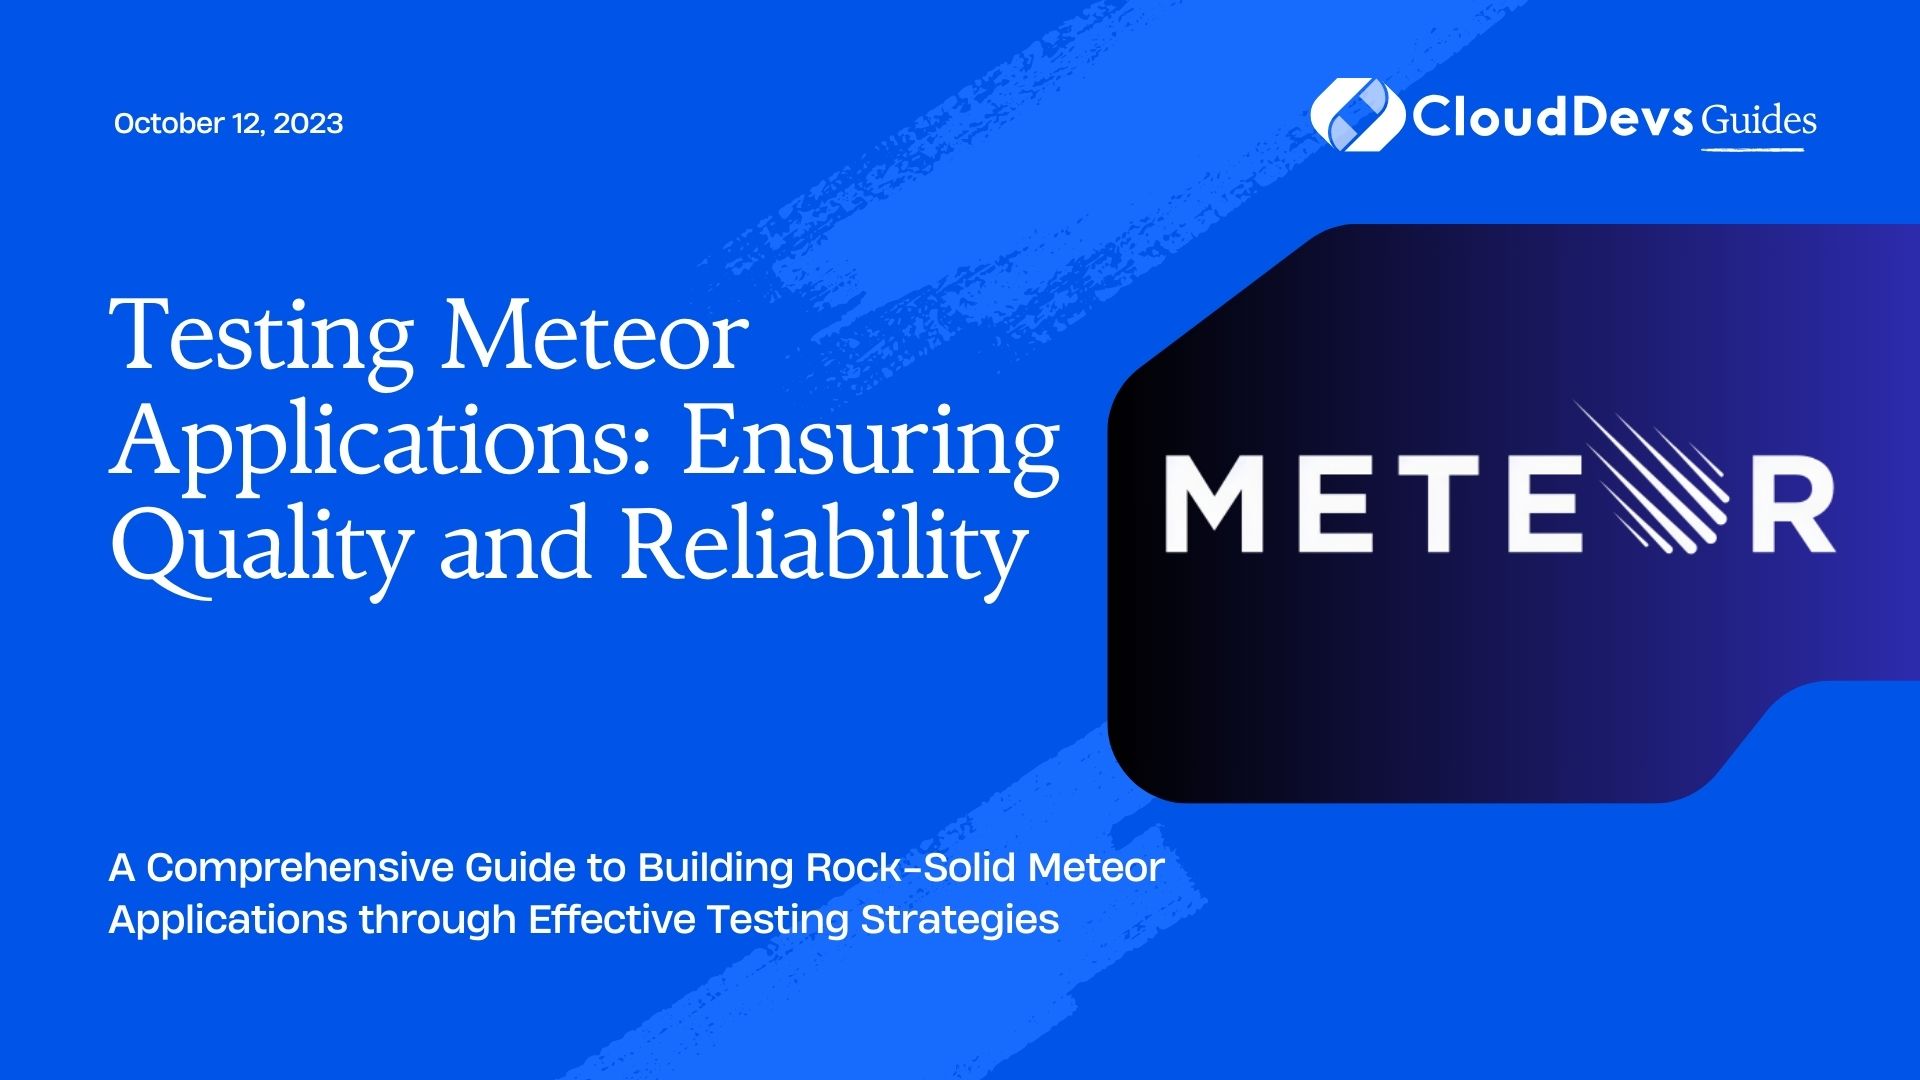 Testing Meteor Applications: Ensuring Quality and Reliability